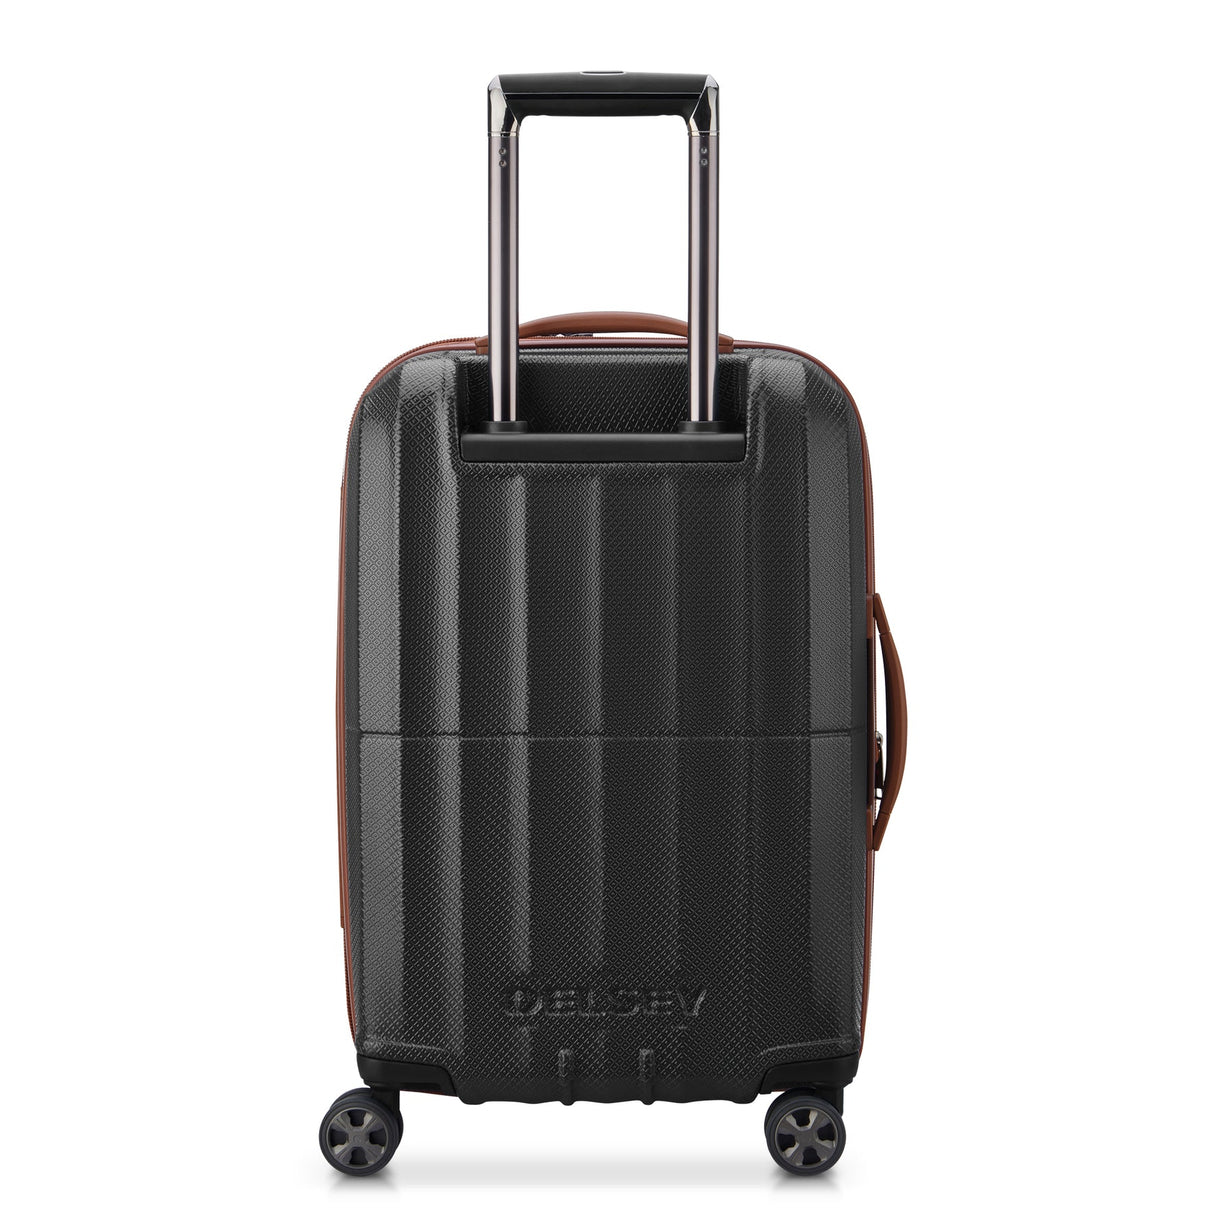 Delsey St Tropez Carry-On Expandable Spinner , , delsey-st-tropez-40208780500-17_1800x1800_e9f73eb1-5f96-464f-bf23-18dbbb3bc08c